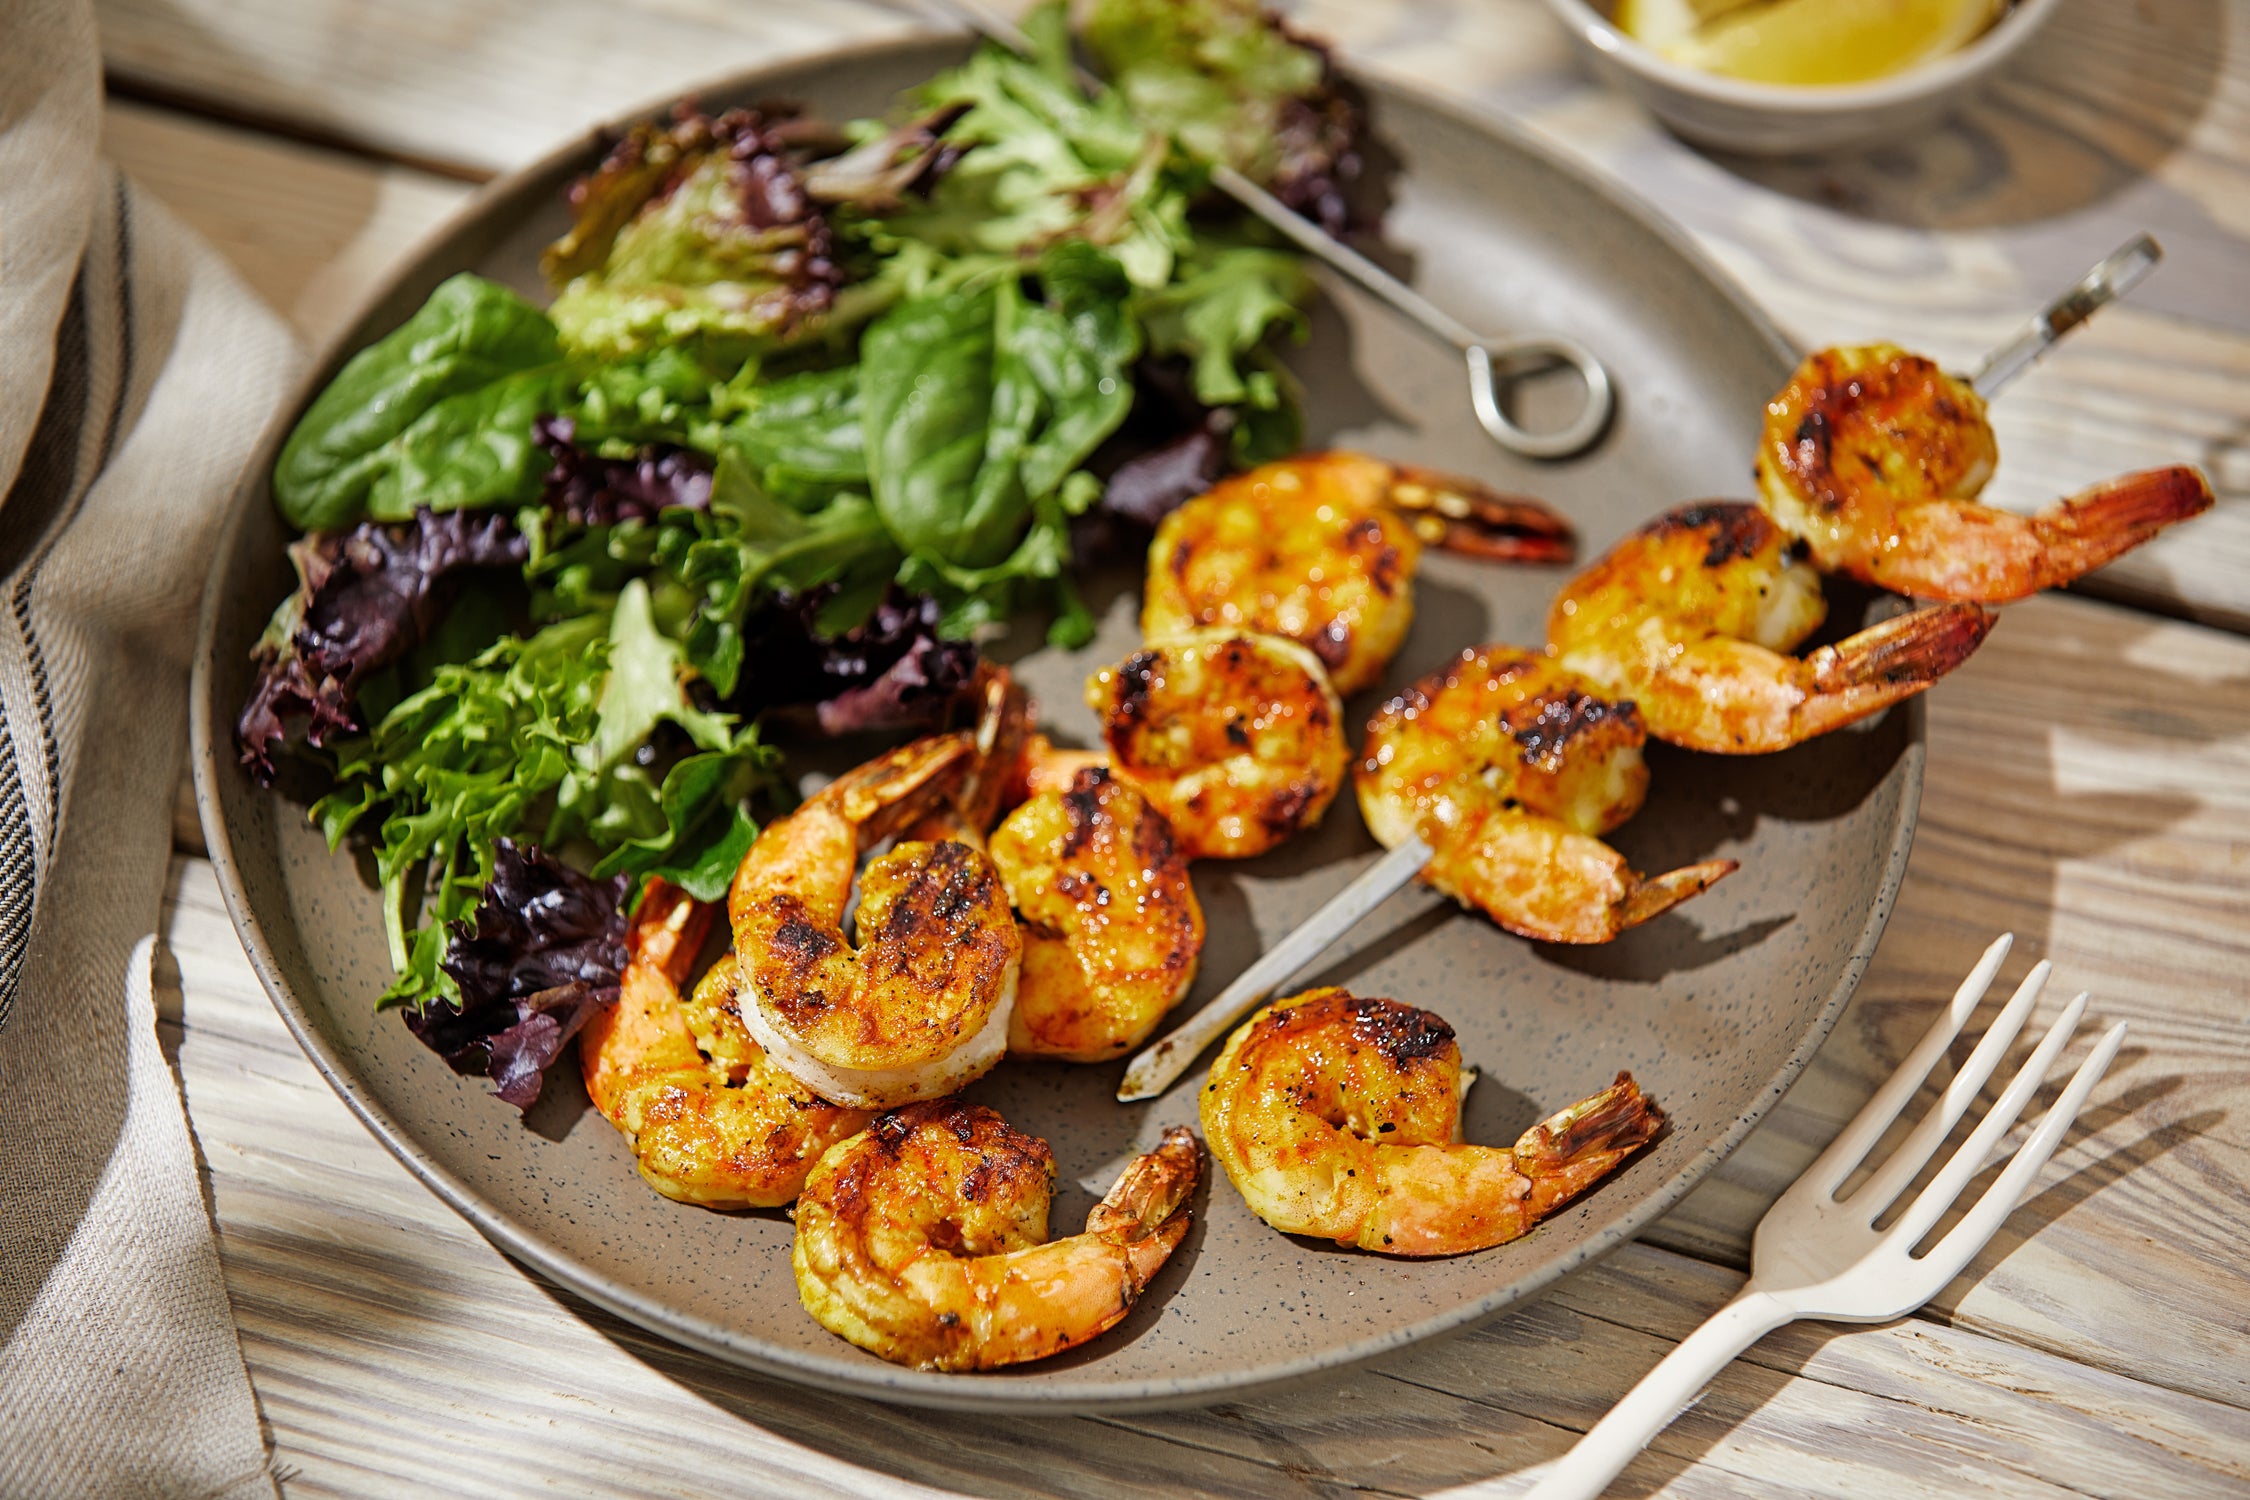 Serve as a tasty and healthy starter or with flatbreads and salad for a main course